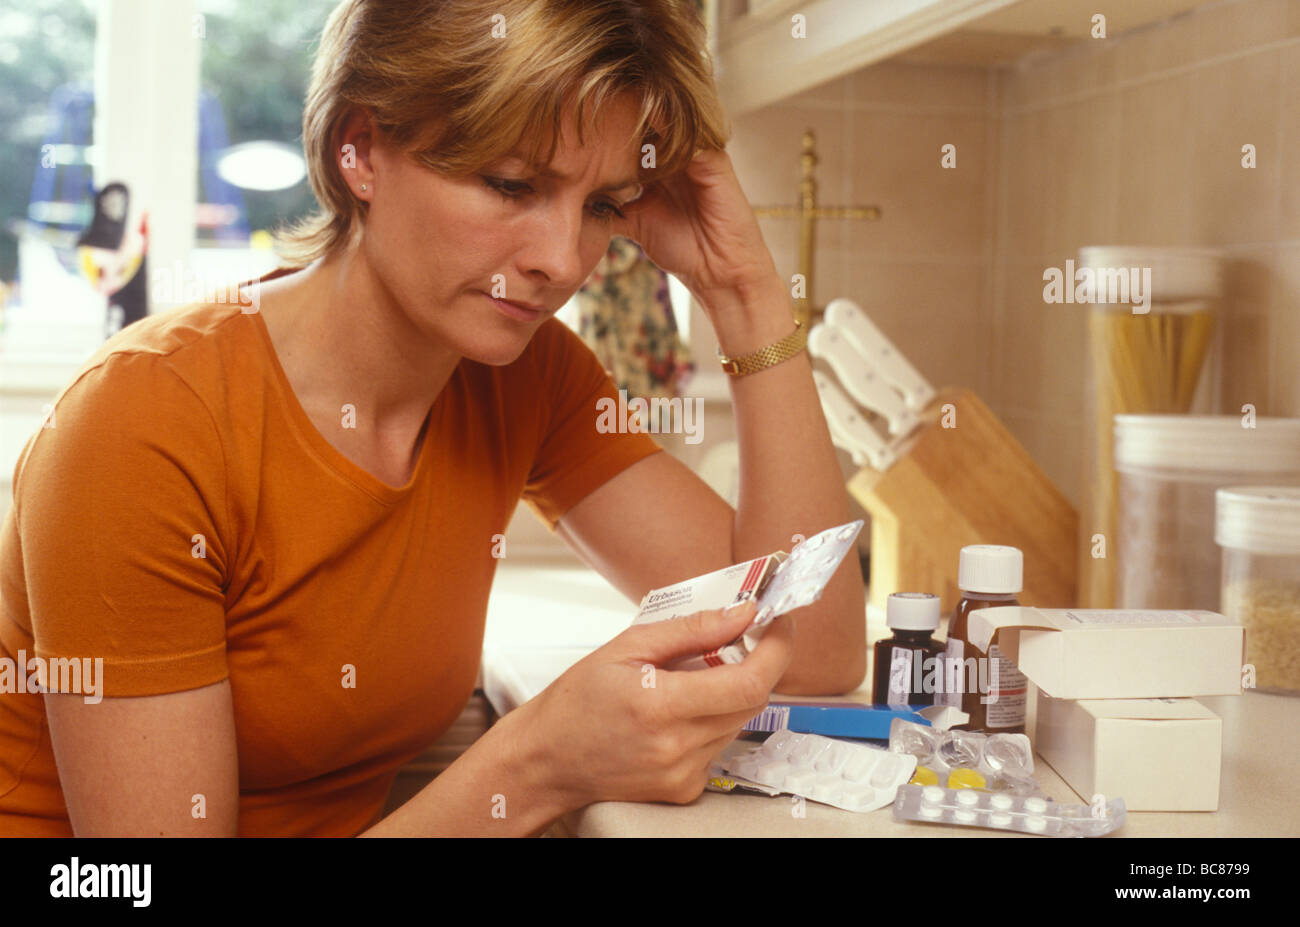 woman in her kitchen with a mixture of drugs deciding what to take Stock Photo